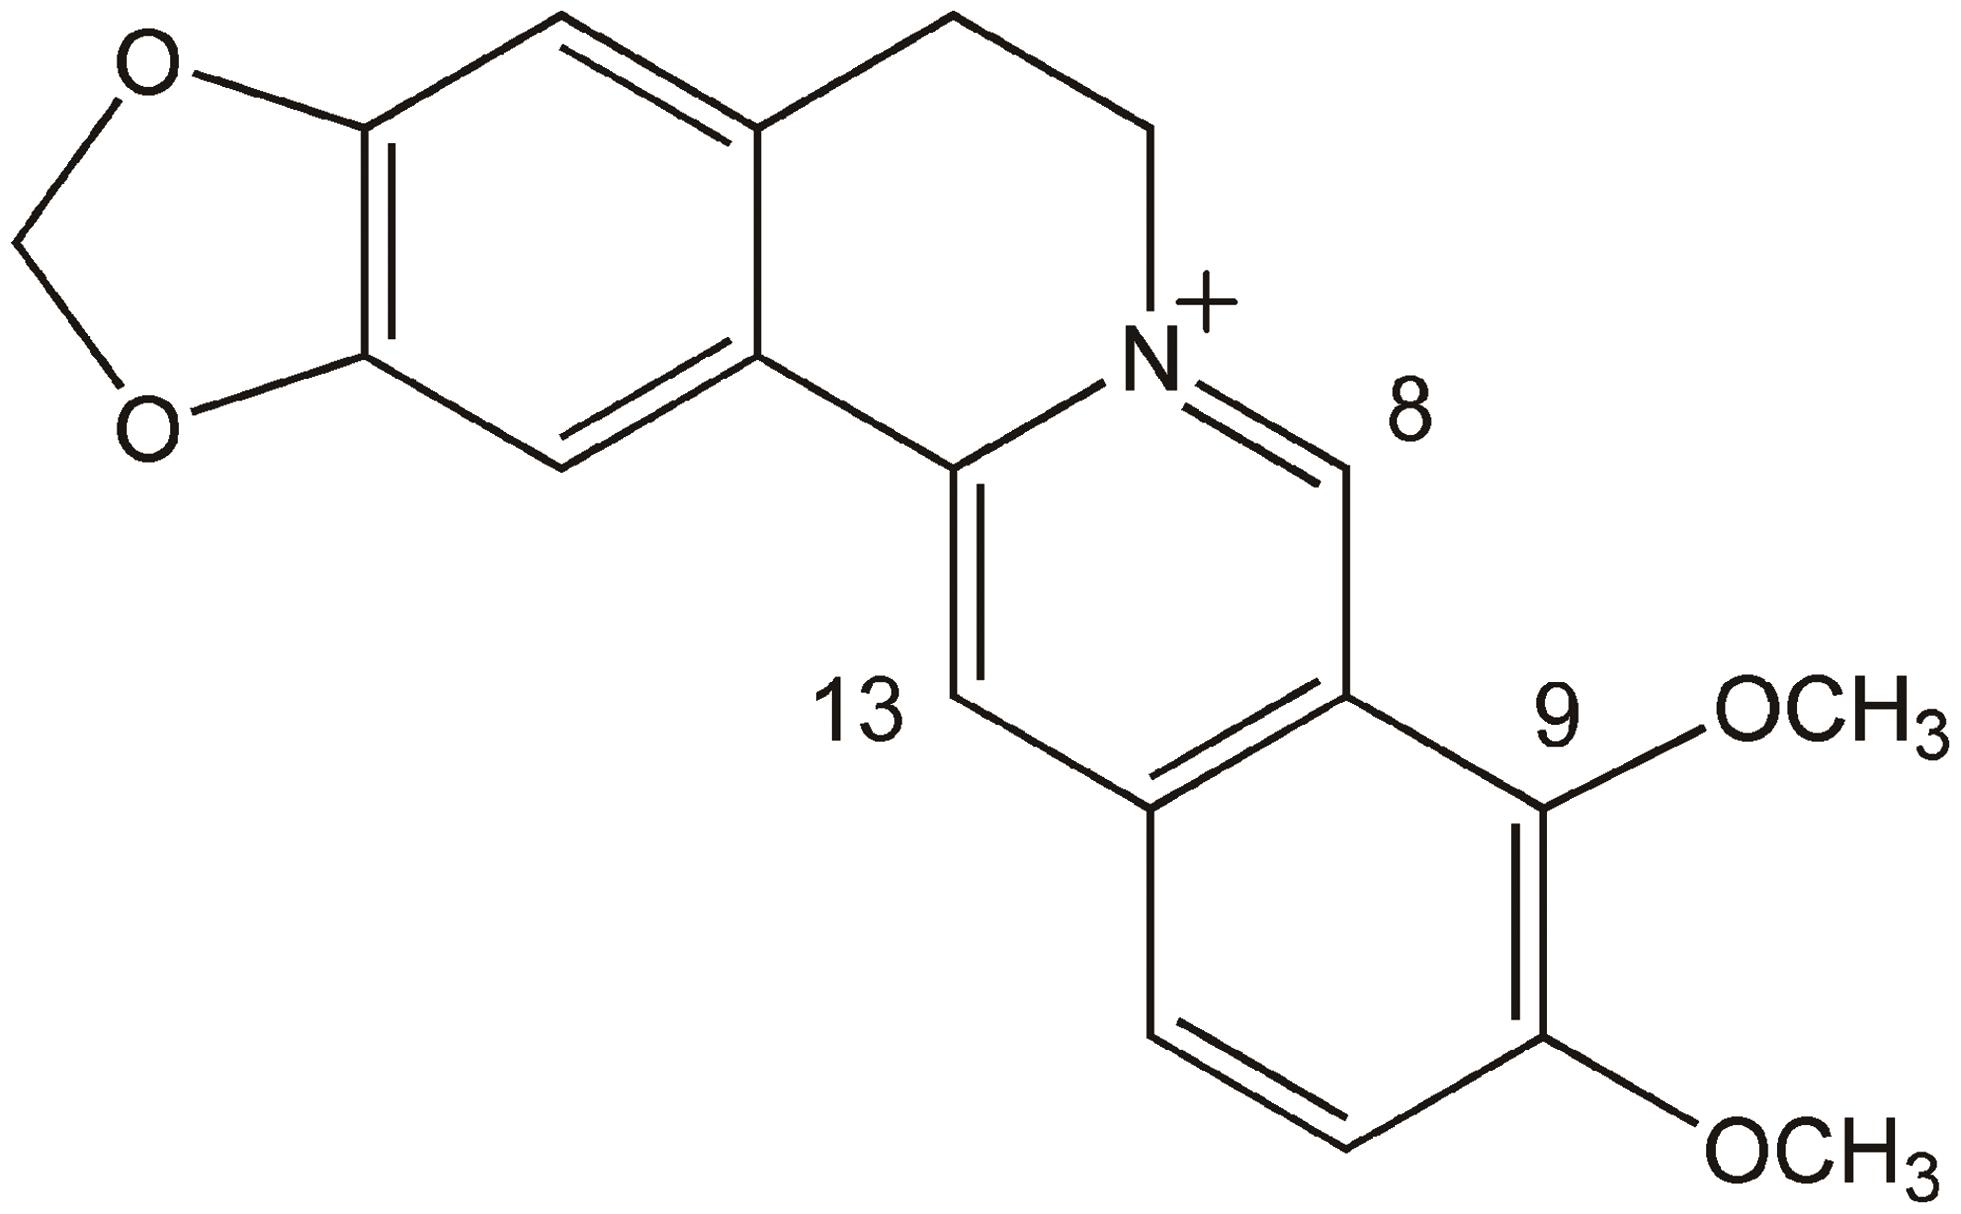 Chemical structure of berberine.